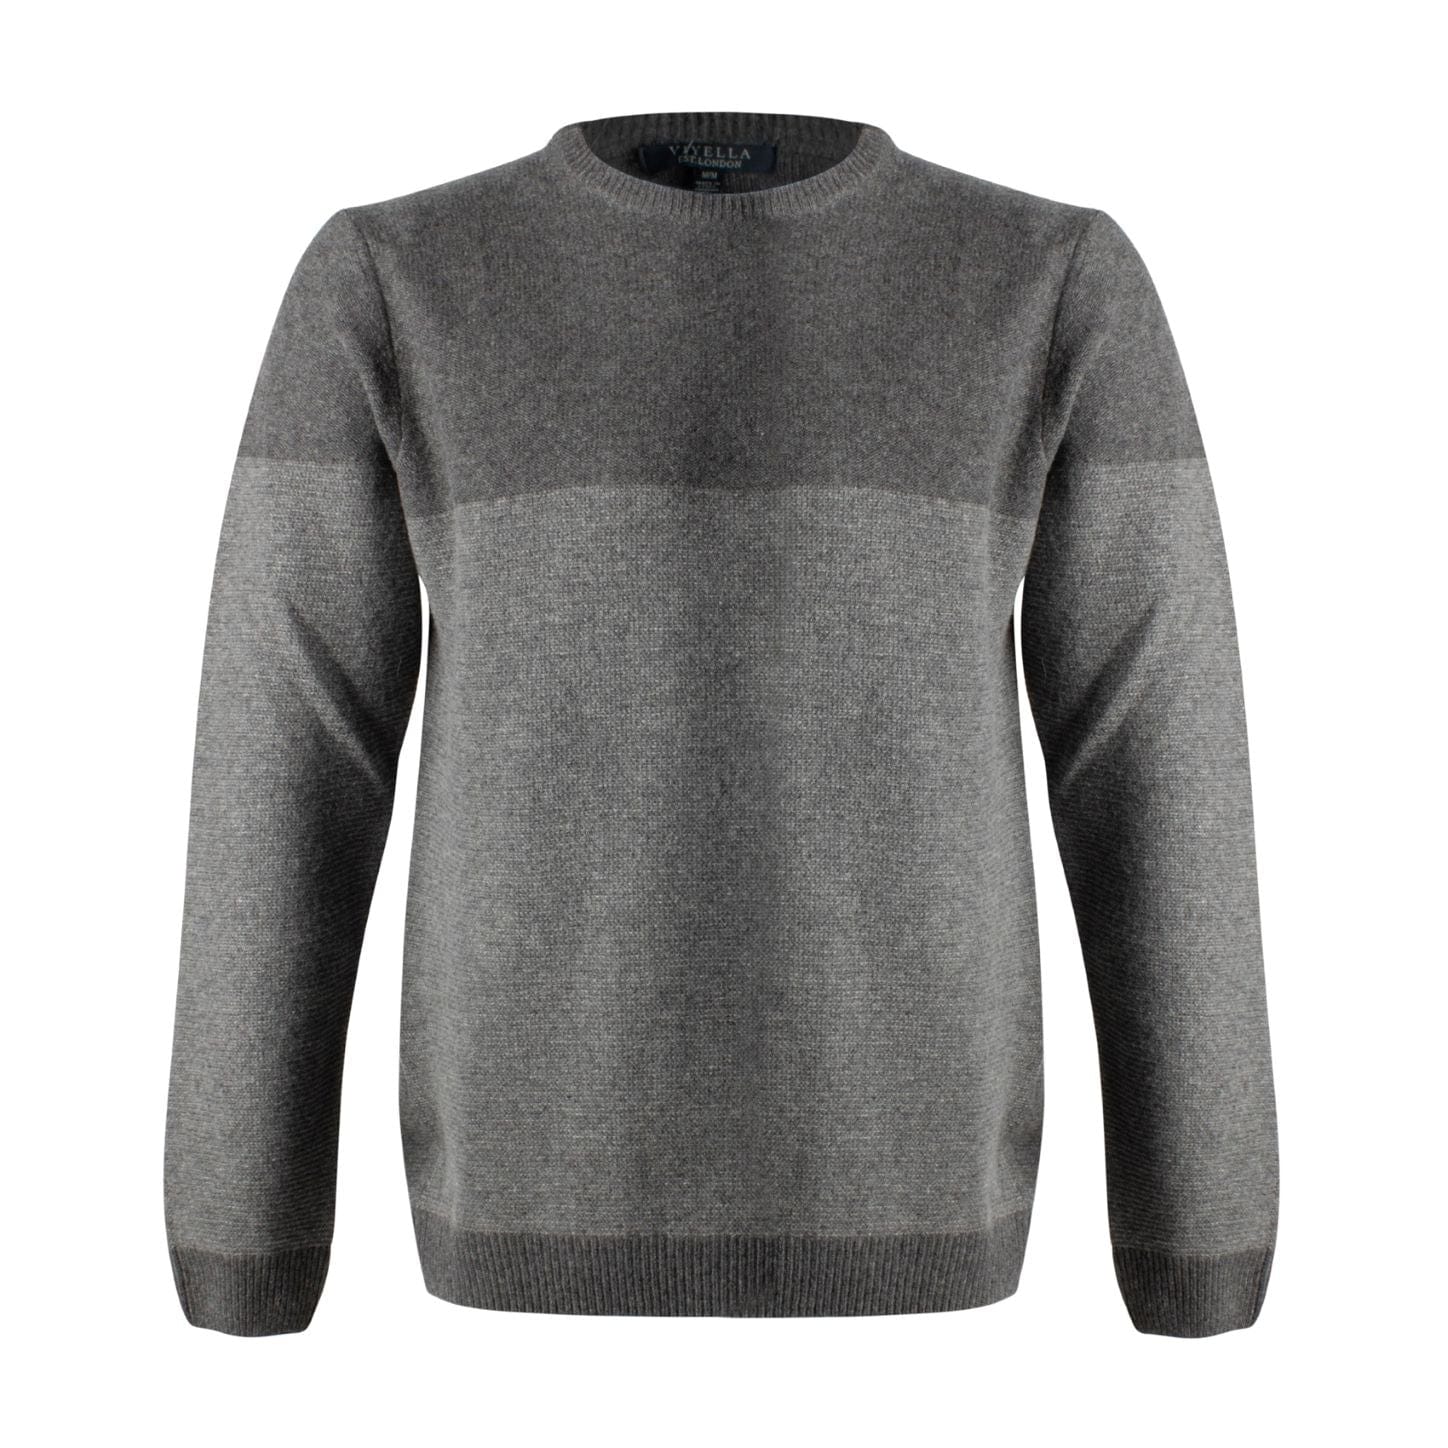 Viyella Discover Classic Style of these Grey 100% Cotton Tonal Crewneck: Crafted with Excellence in Italy